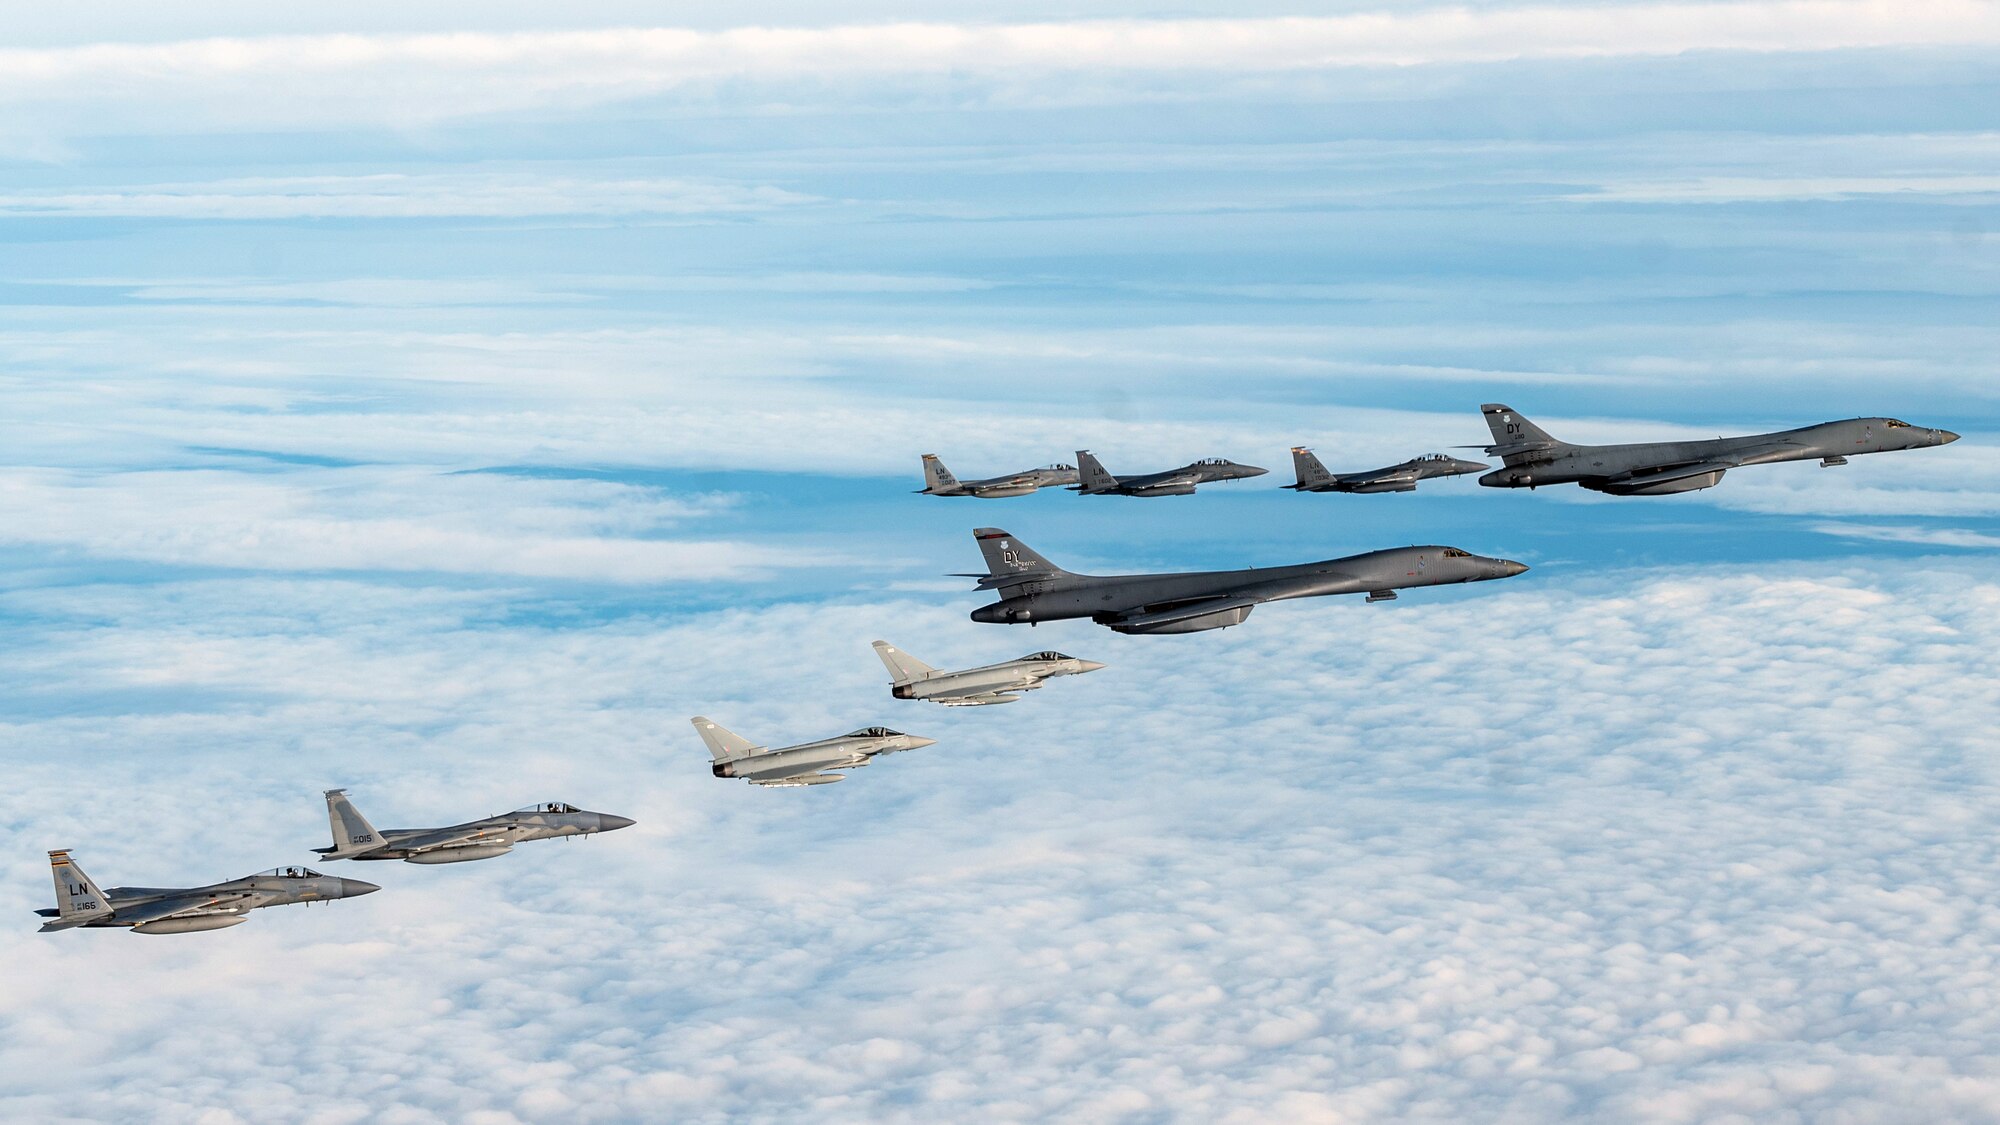 U.S. Air Force F-15C Eagles, F-15E Strike Eagles, and Royal Air Force Typhoon FGR4s escort B-1 Lancers during a bomber task force mission in the North Sea Region